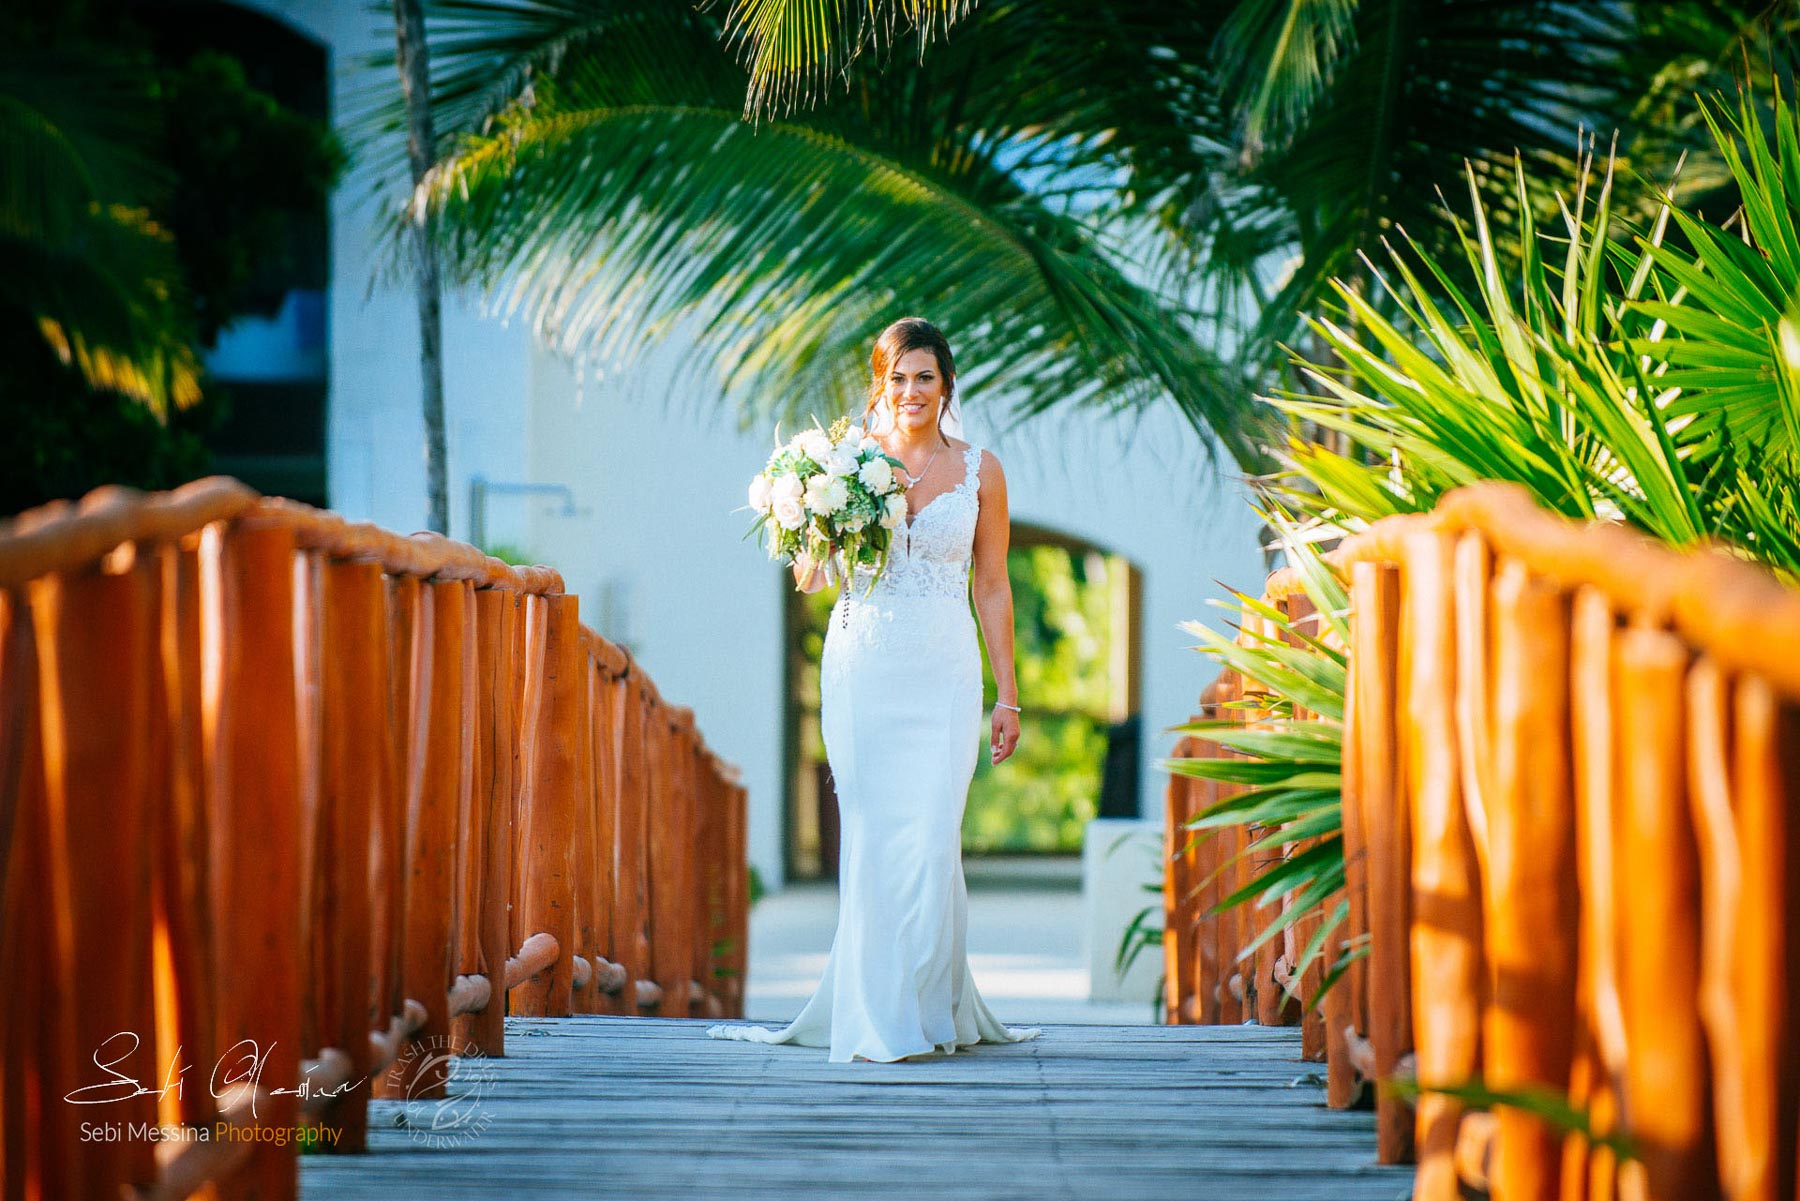 First look – Wedding in Mexico – Sebi Messina Photography